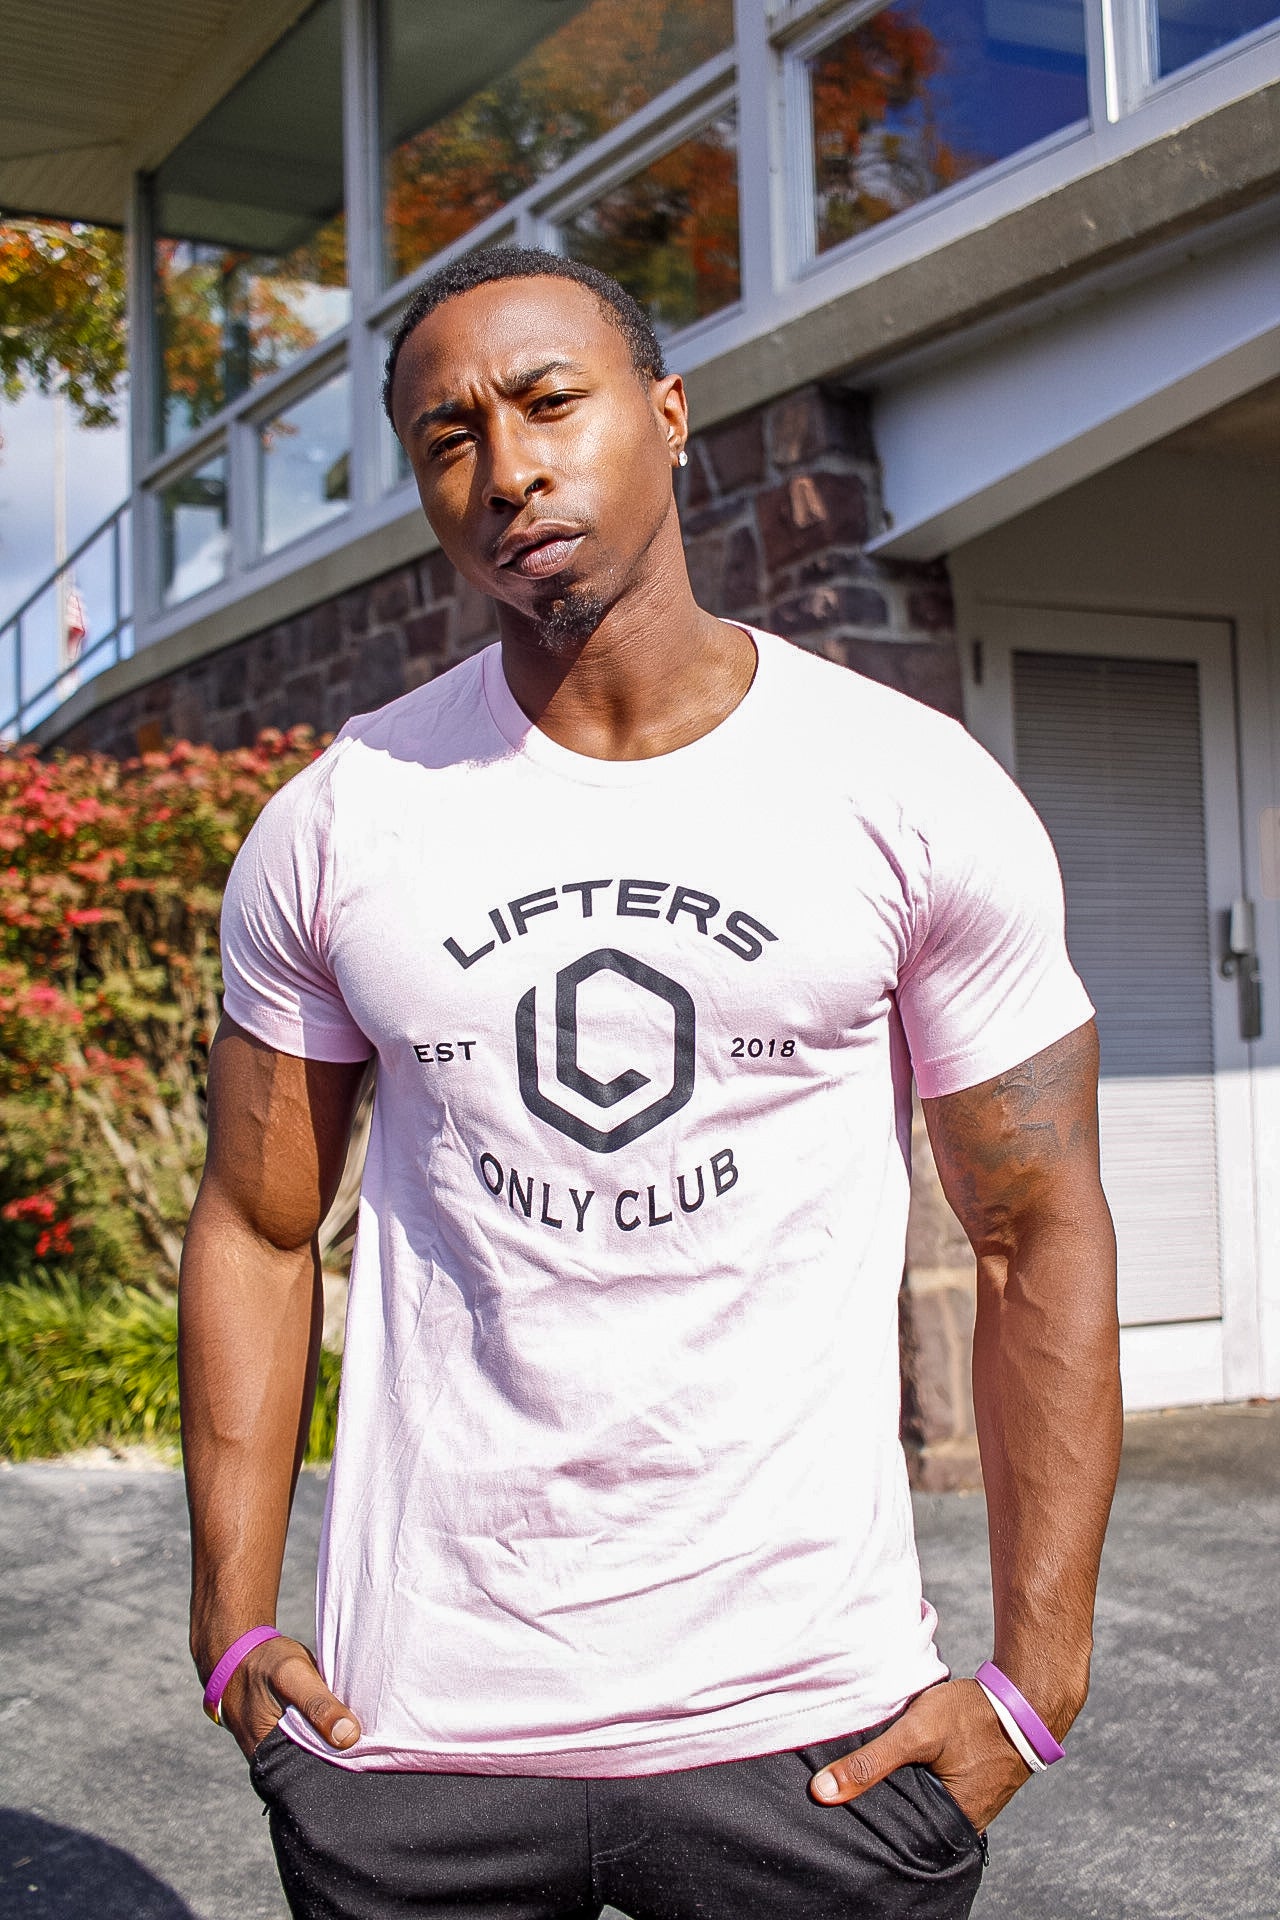 Lifter x Breast Cancer Tee